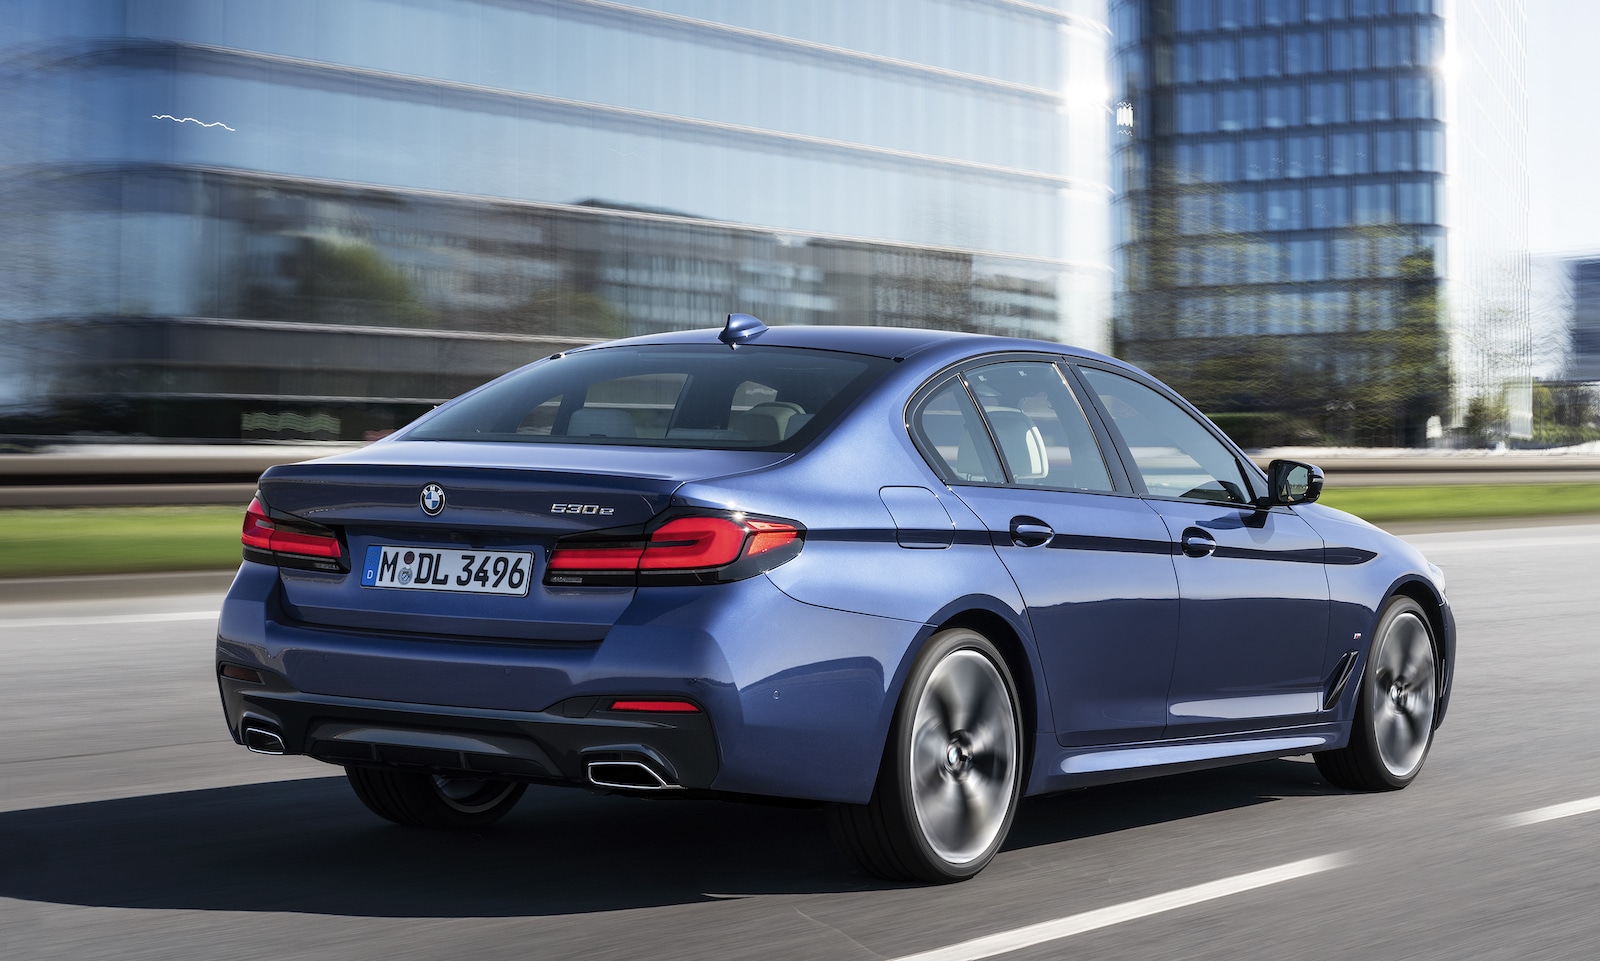 BMW Keeps on Truckin’ with its 2021 5 Series Sedan | TheDetroitBureau.com